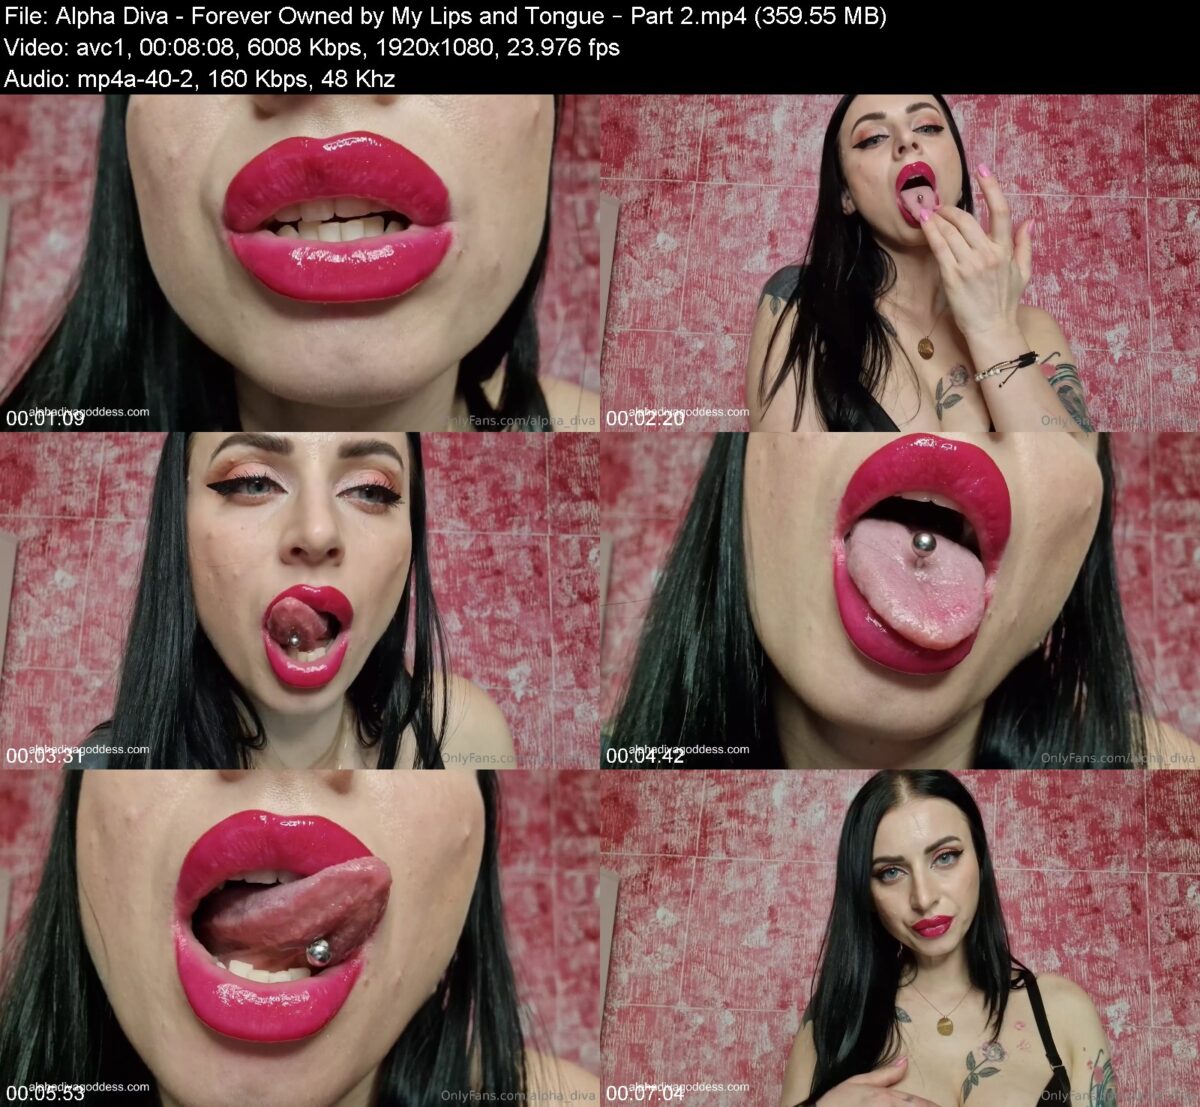 Alpha Diva - Forever Owned by My Lips and Tongue - Part 2